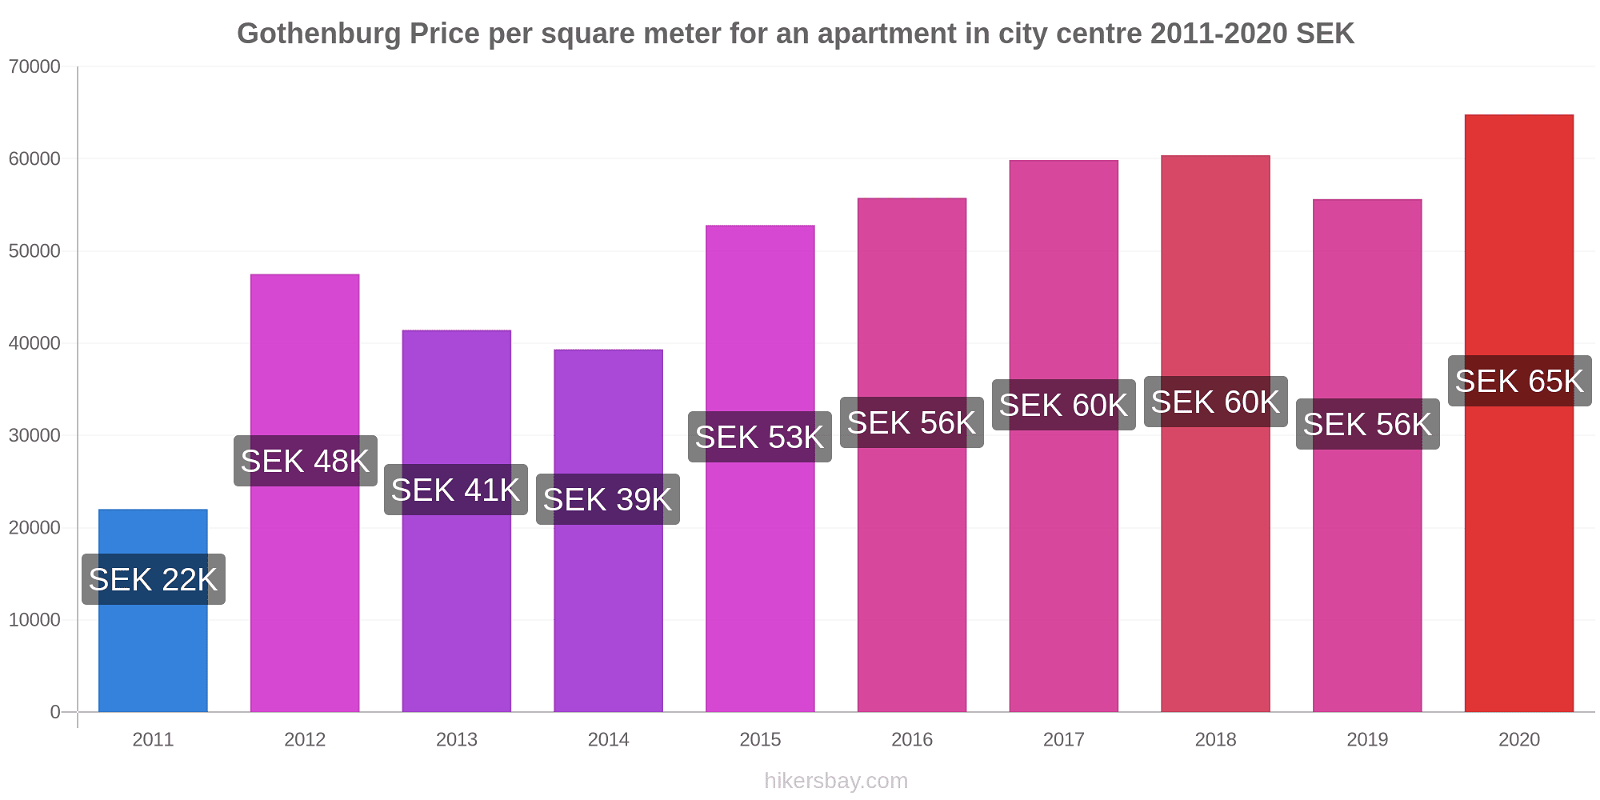 Gothenburg price changes Price per square meter for an apartment in city centre hikersbay.com